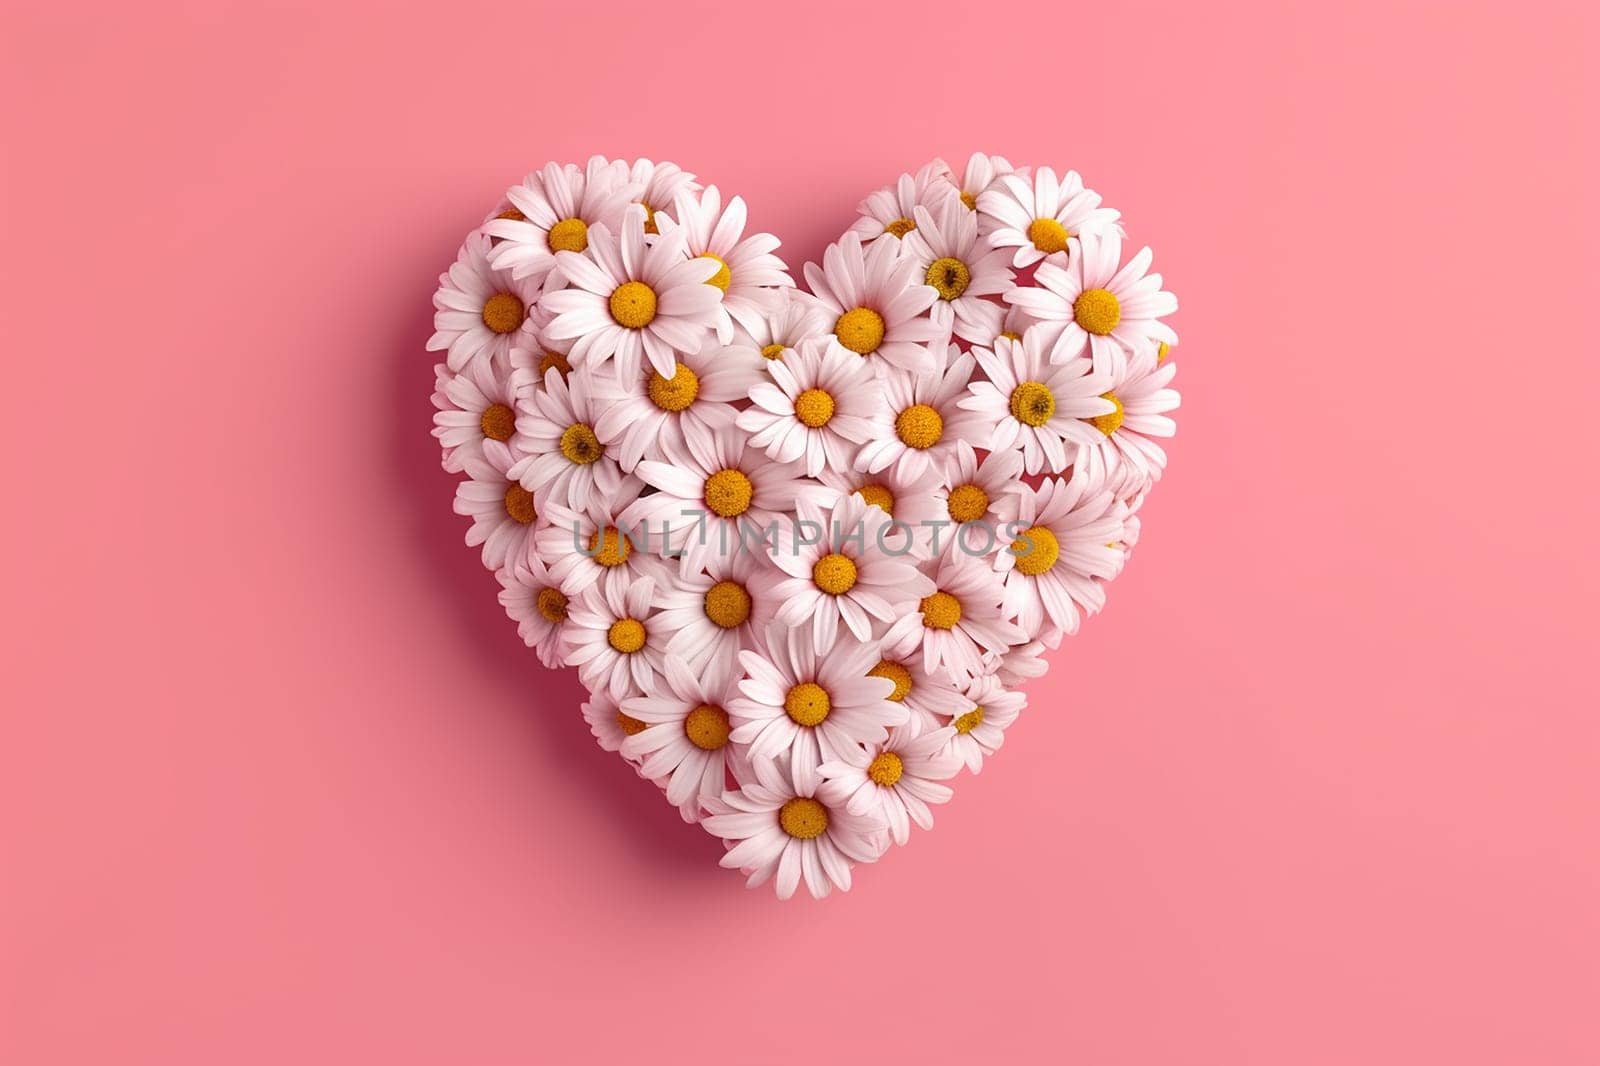 Heart shaped arrangement of daisies on a pink background by Hype2art